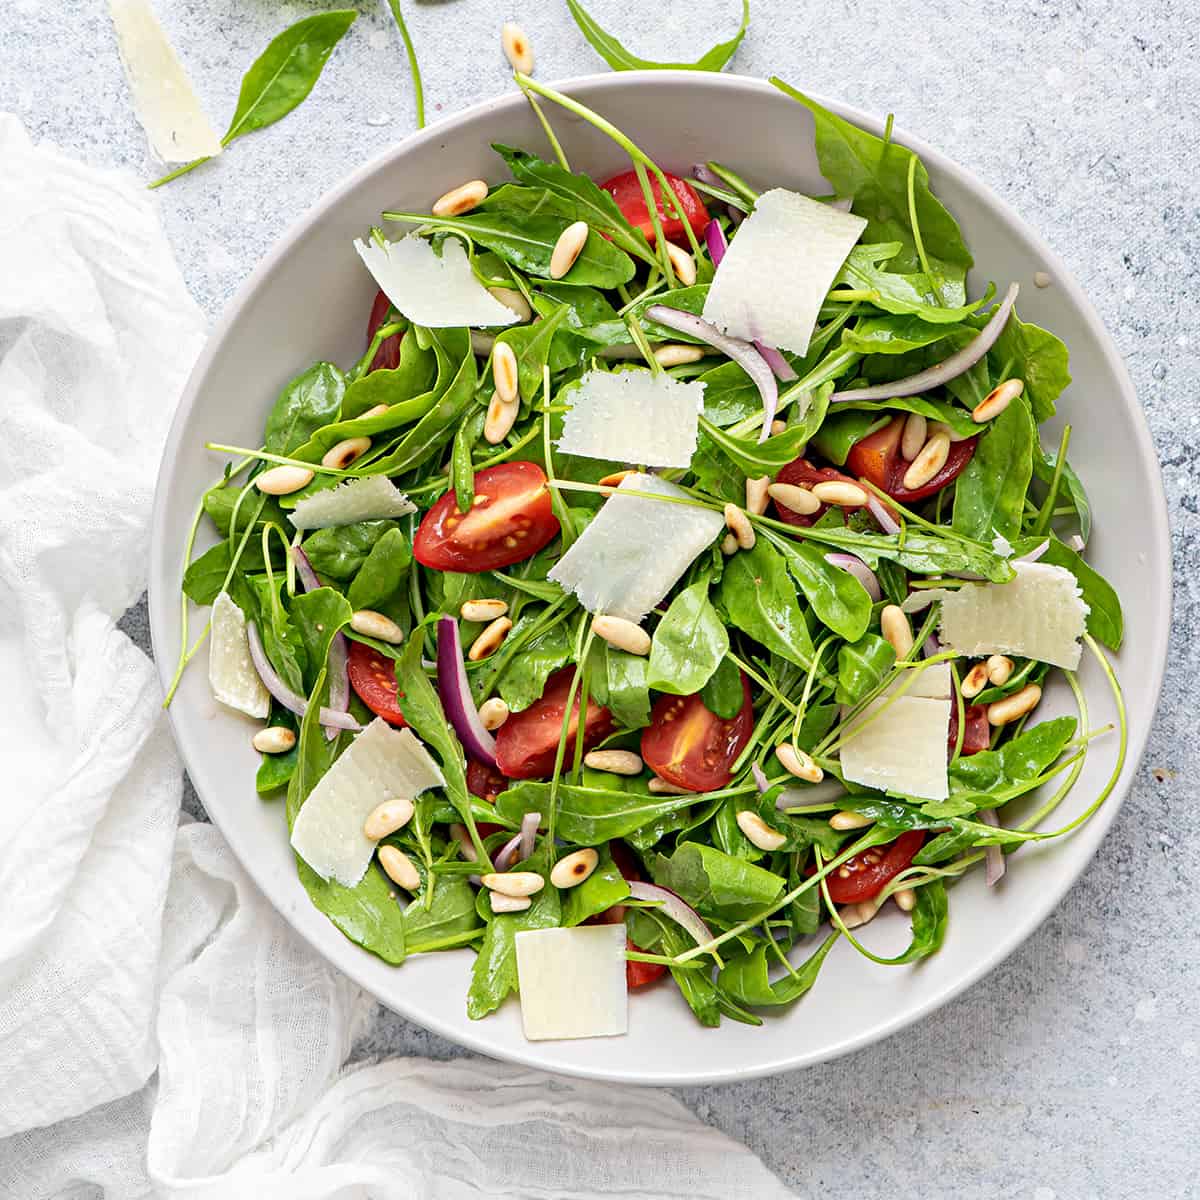 Chicken and Arugula Salad with Toasted Pine Nuts and a Balsamic